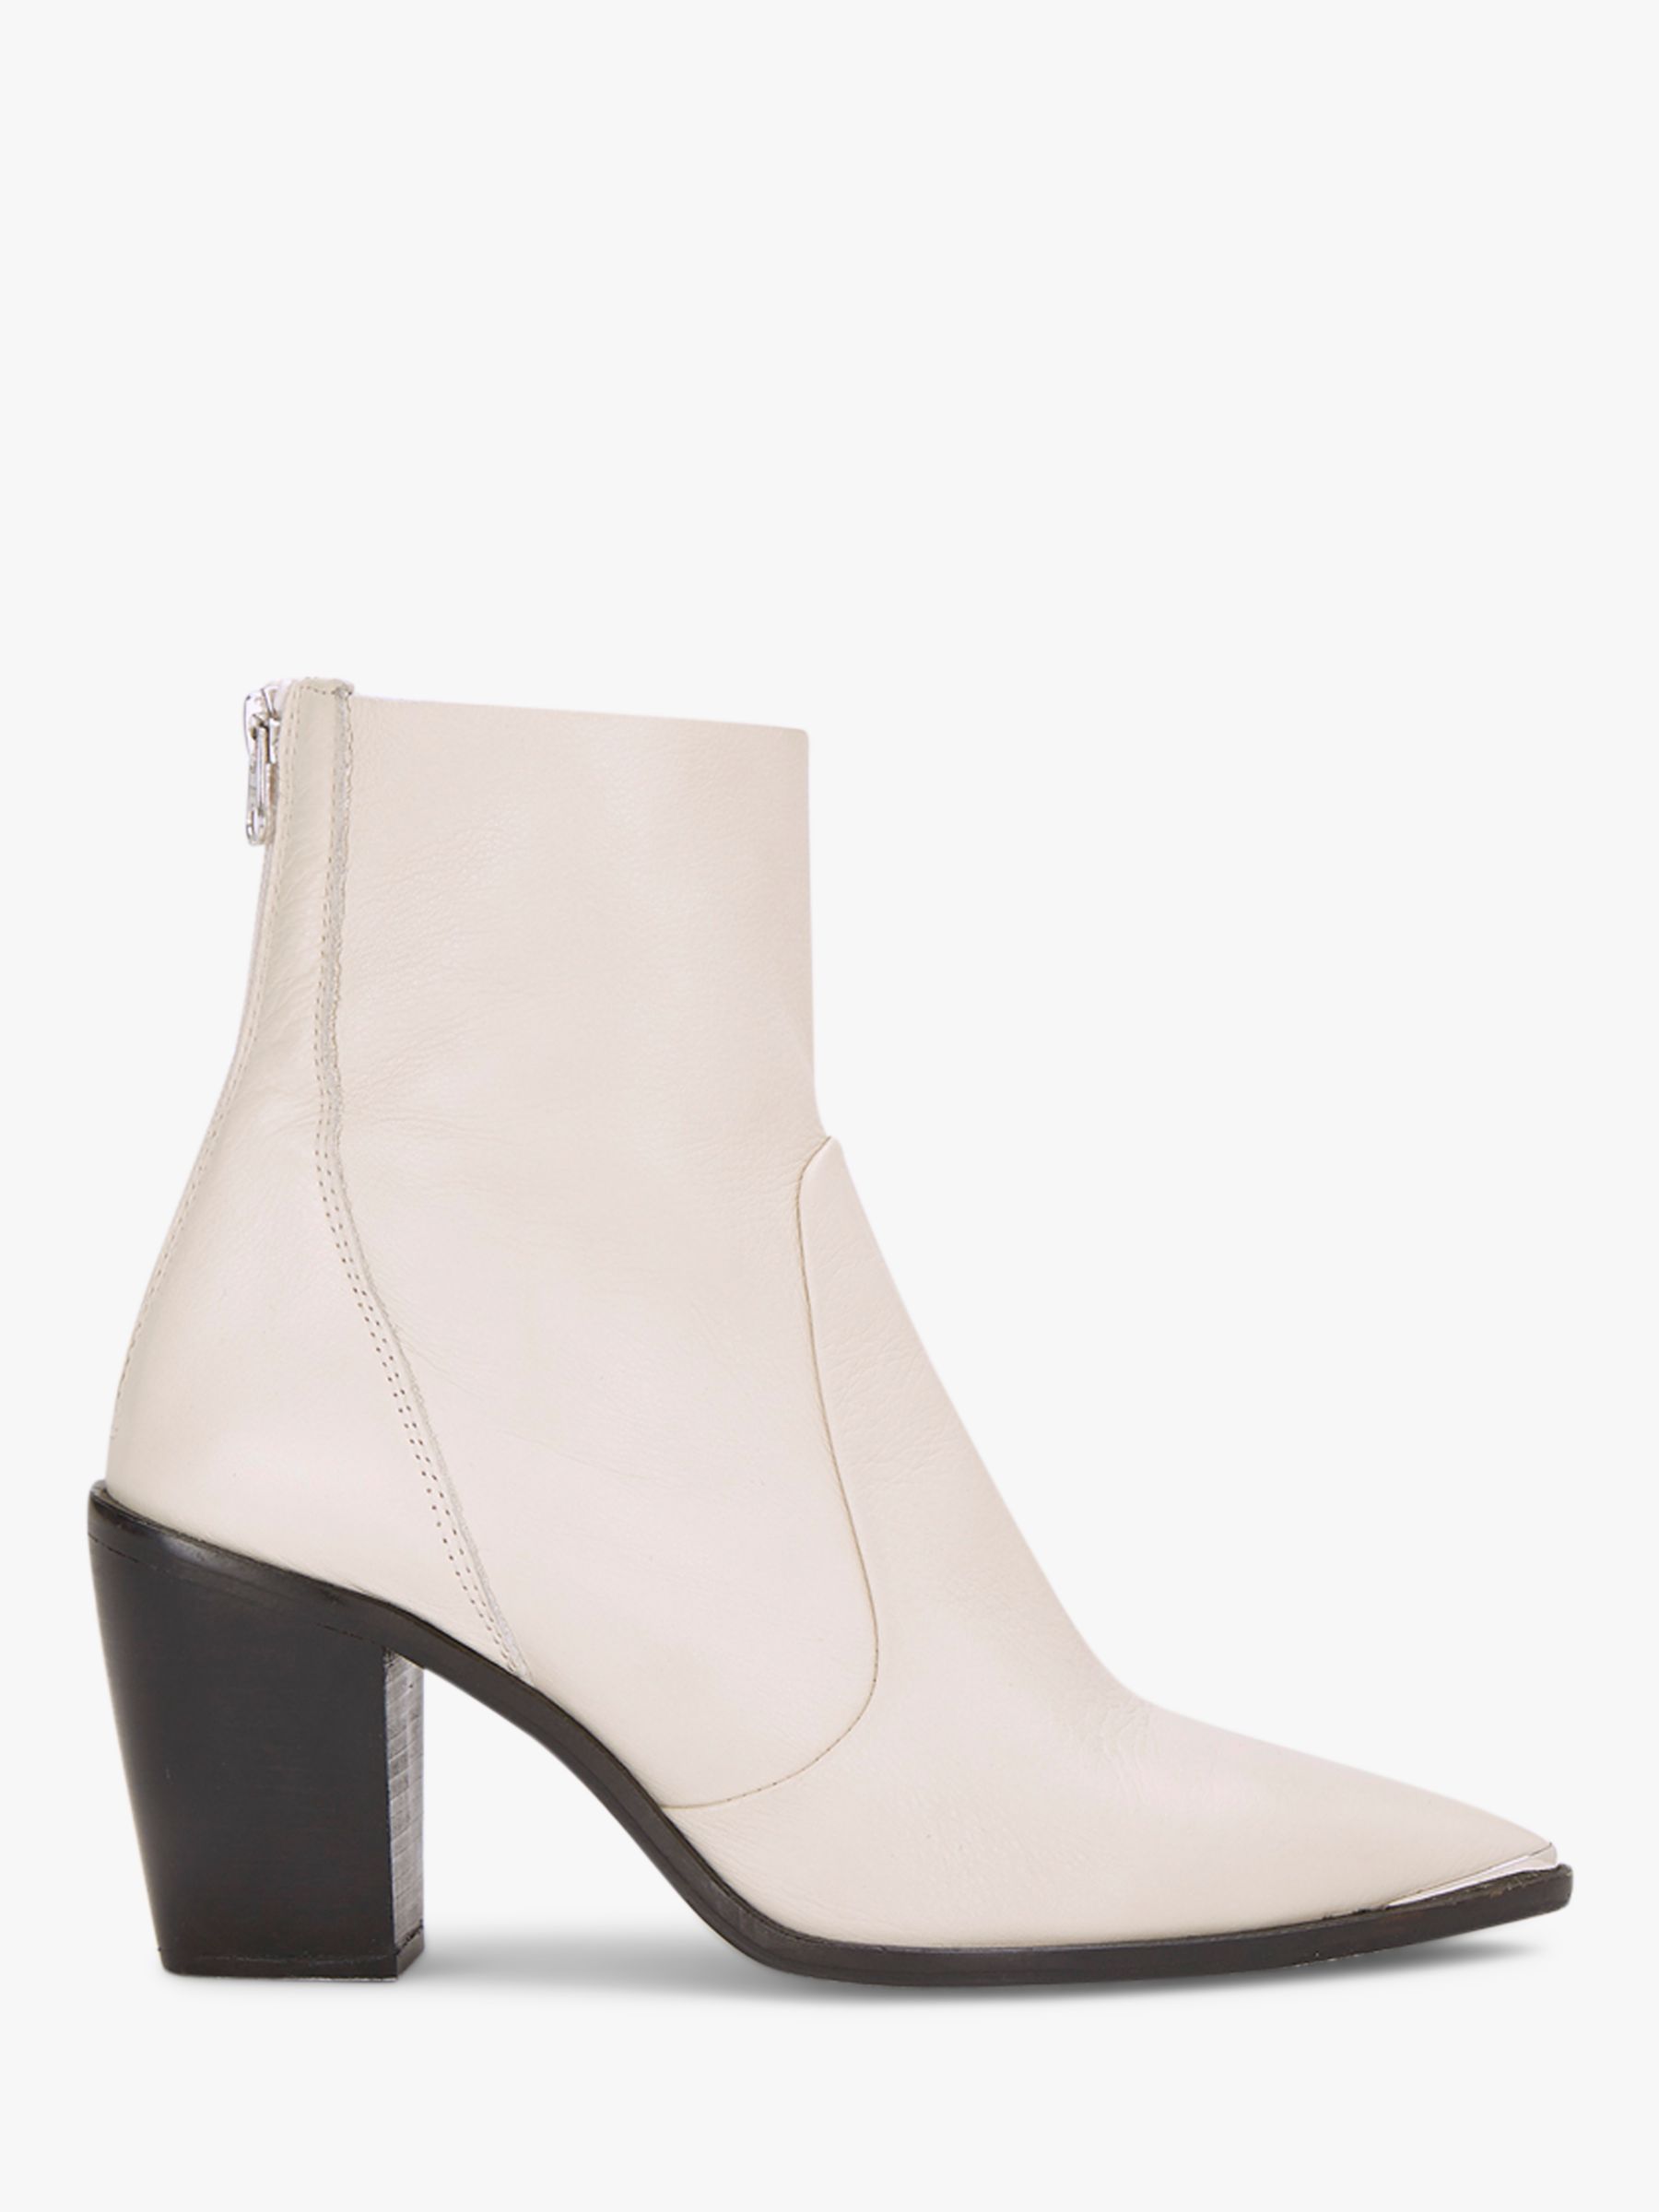 tan pointed toe booties